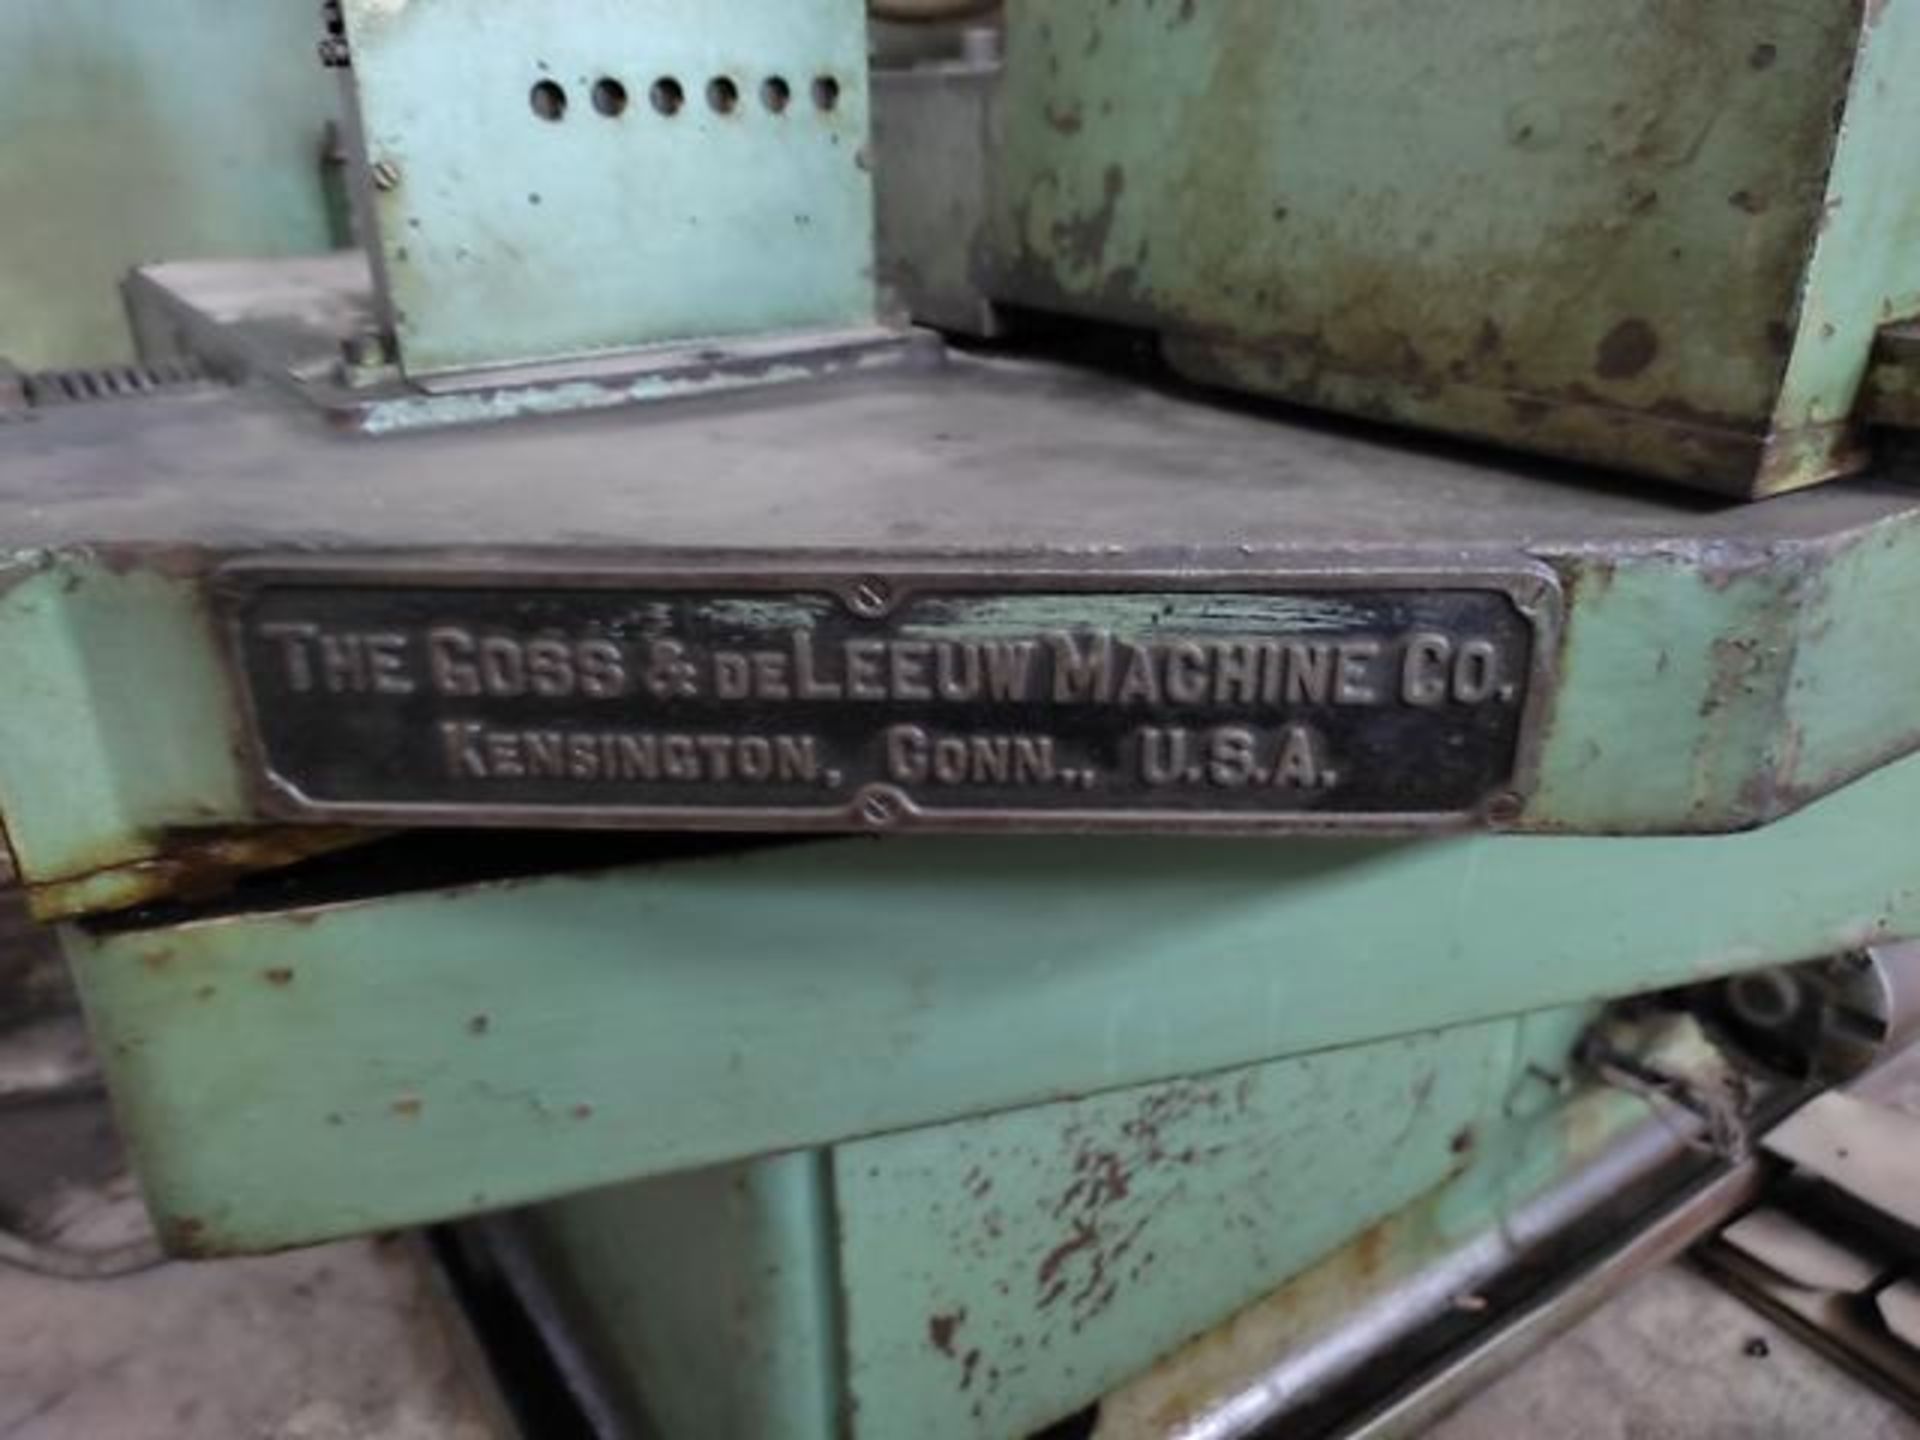 Goss 1-2-3 Chucking Machine, Serial: 2317: 7 Spindle, 3-1/2” Diameter, 4 Chucking Positions with - Image 25 of 26